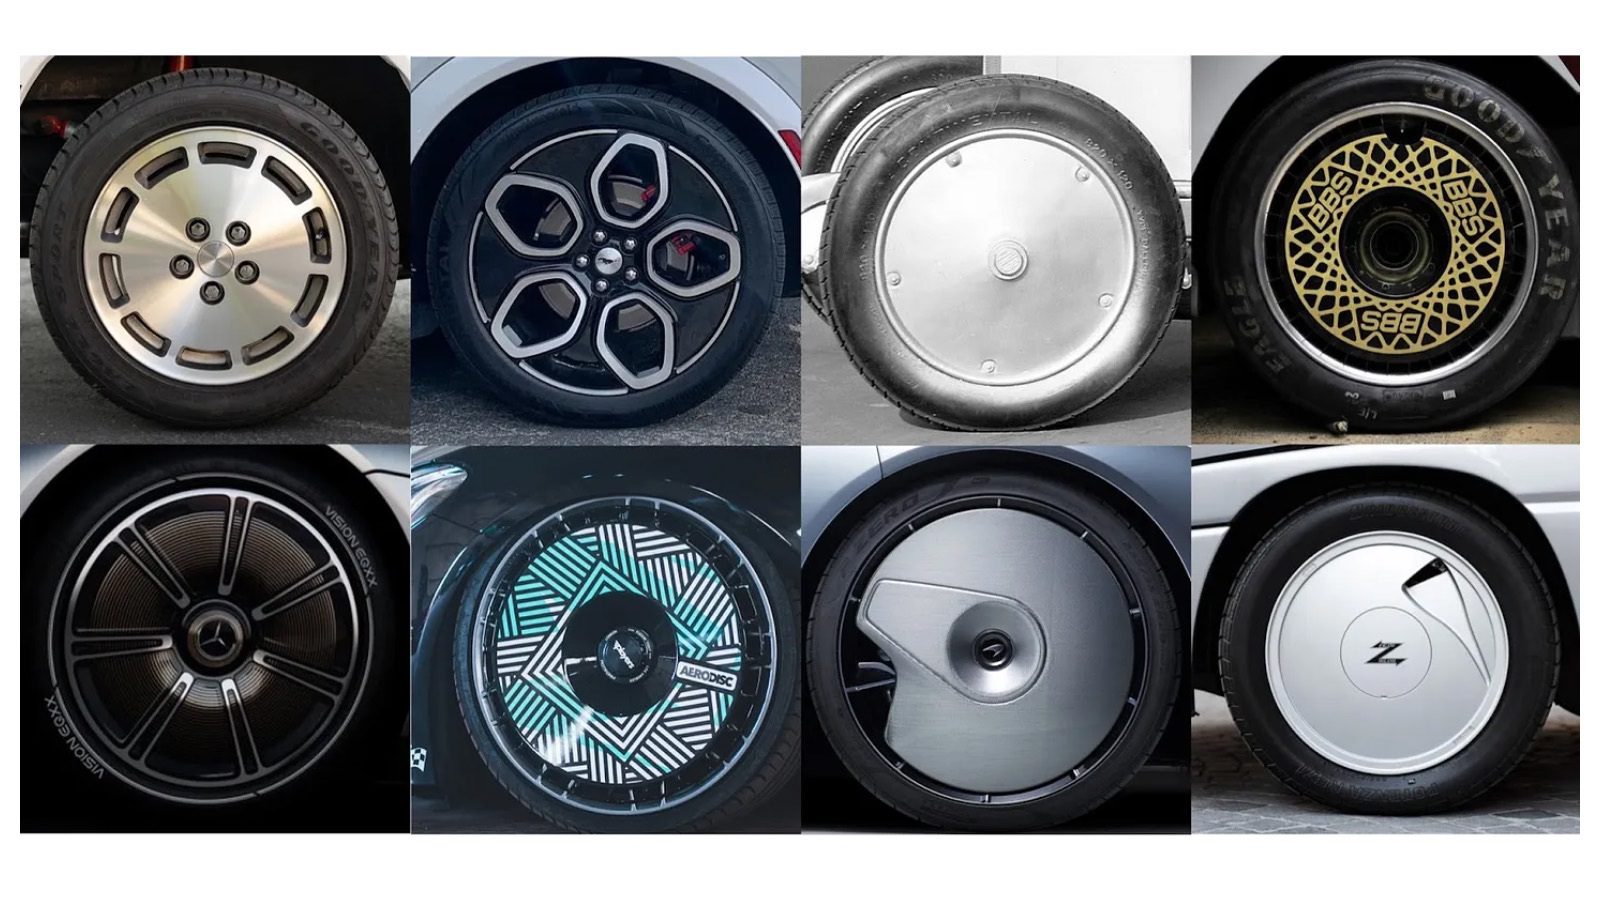 Collage of different rim designs for wheels